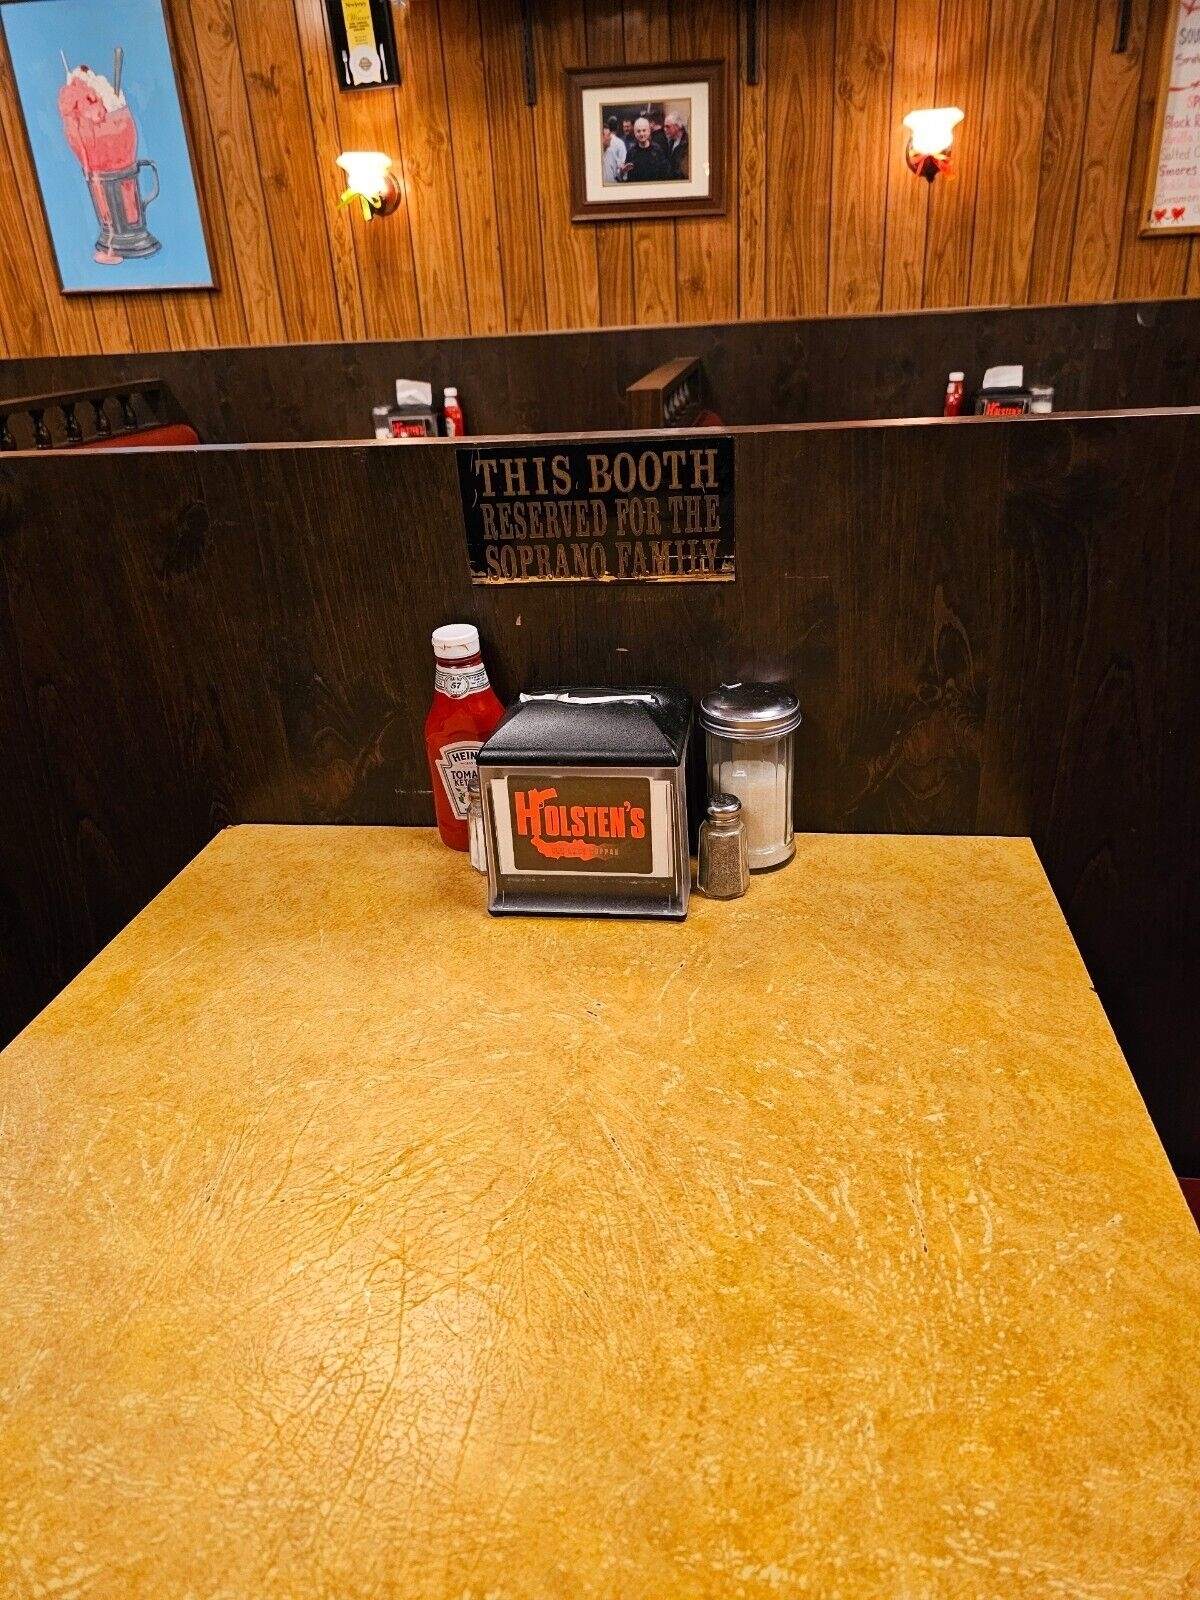 A diner booth with a sign stating &quot;THIS BOOTH RESERVED FOR THE SOPRANO FAMILY,&quot; with condiments on the table